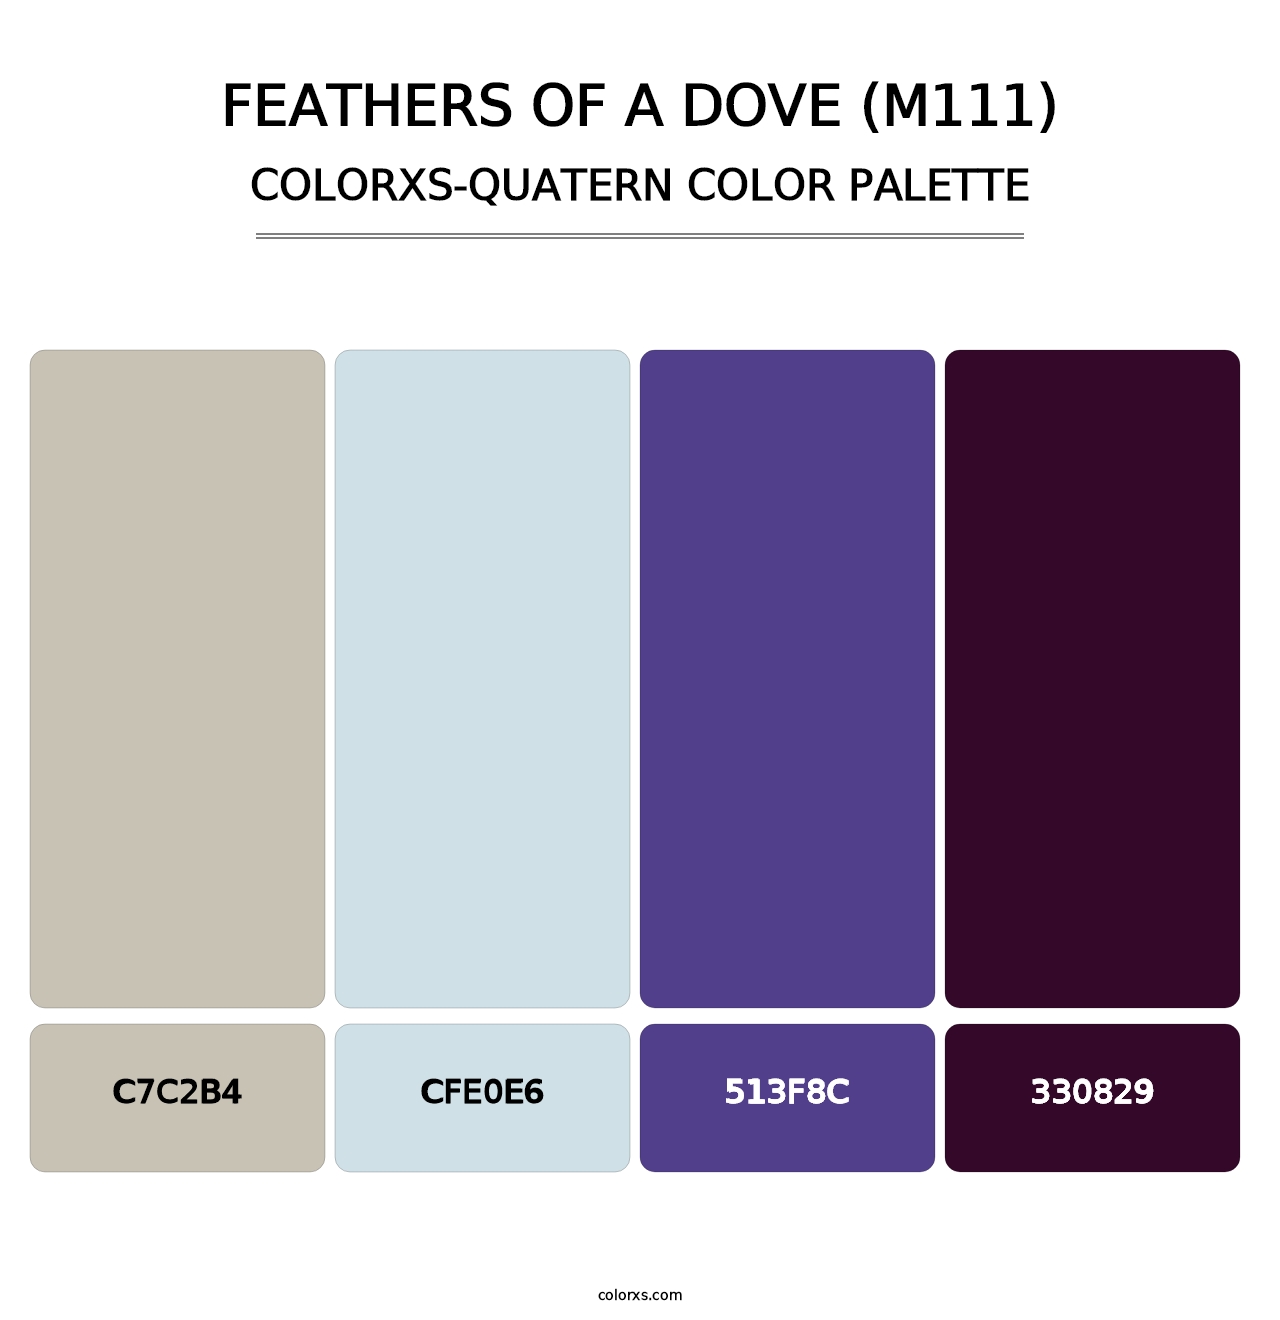 Feathers of a Dove (M111) - Colorxs Quatern Palette